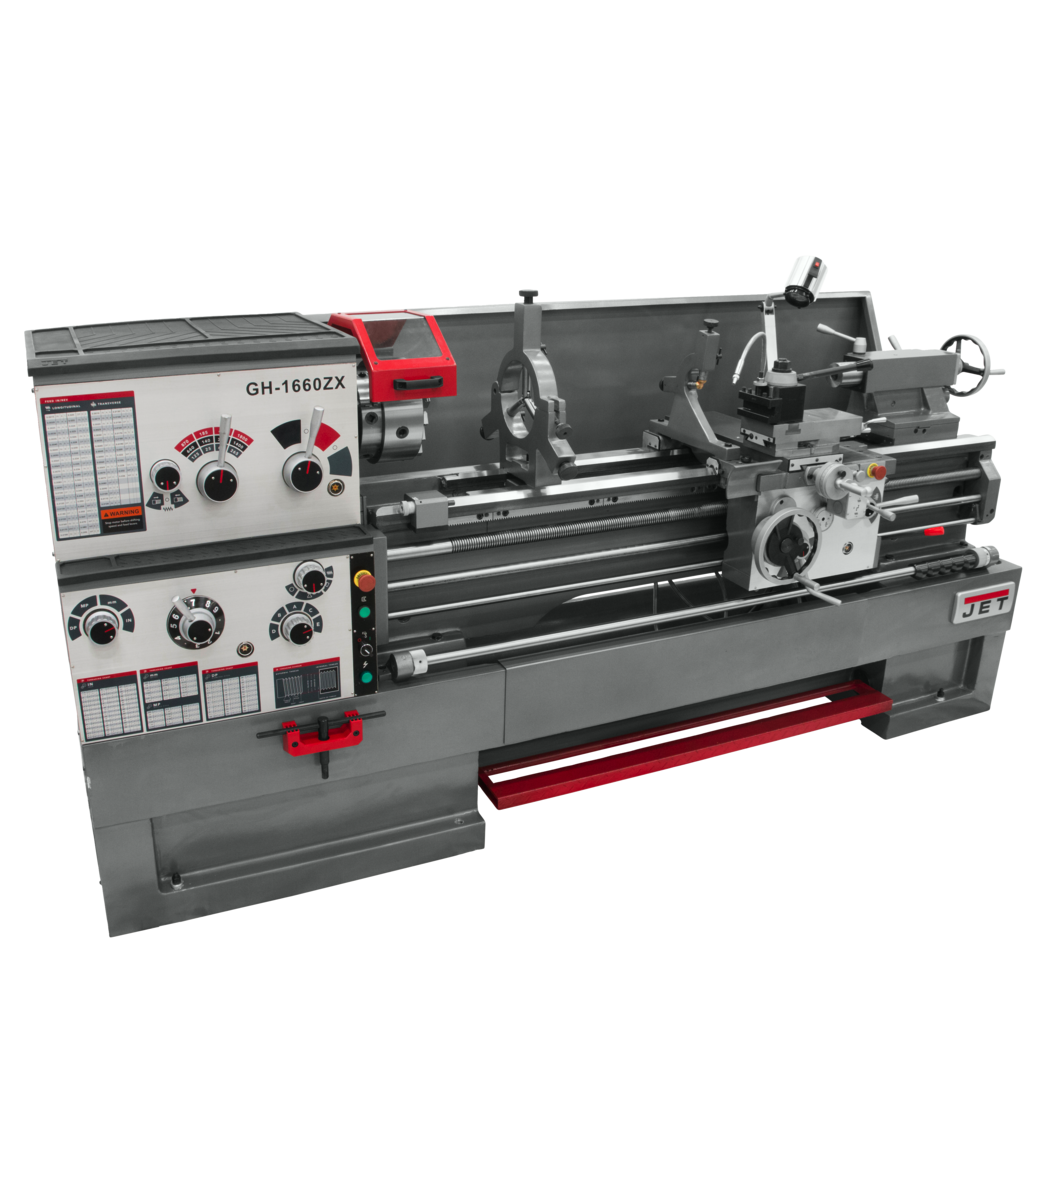 321389, GH-1660ZX , 16" Swing, 60" Between Centers, GH-1660ZX With  ACU-RITE 303 DRO With Taper Attachment installed, Jet, Metalworking, Turning, Lathes